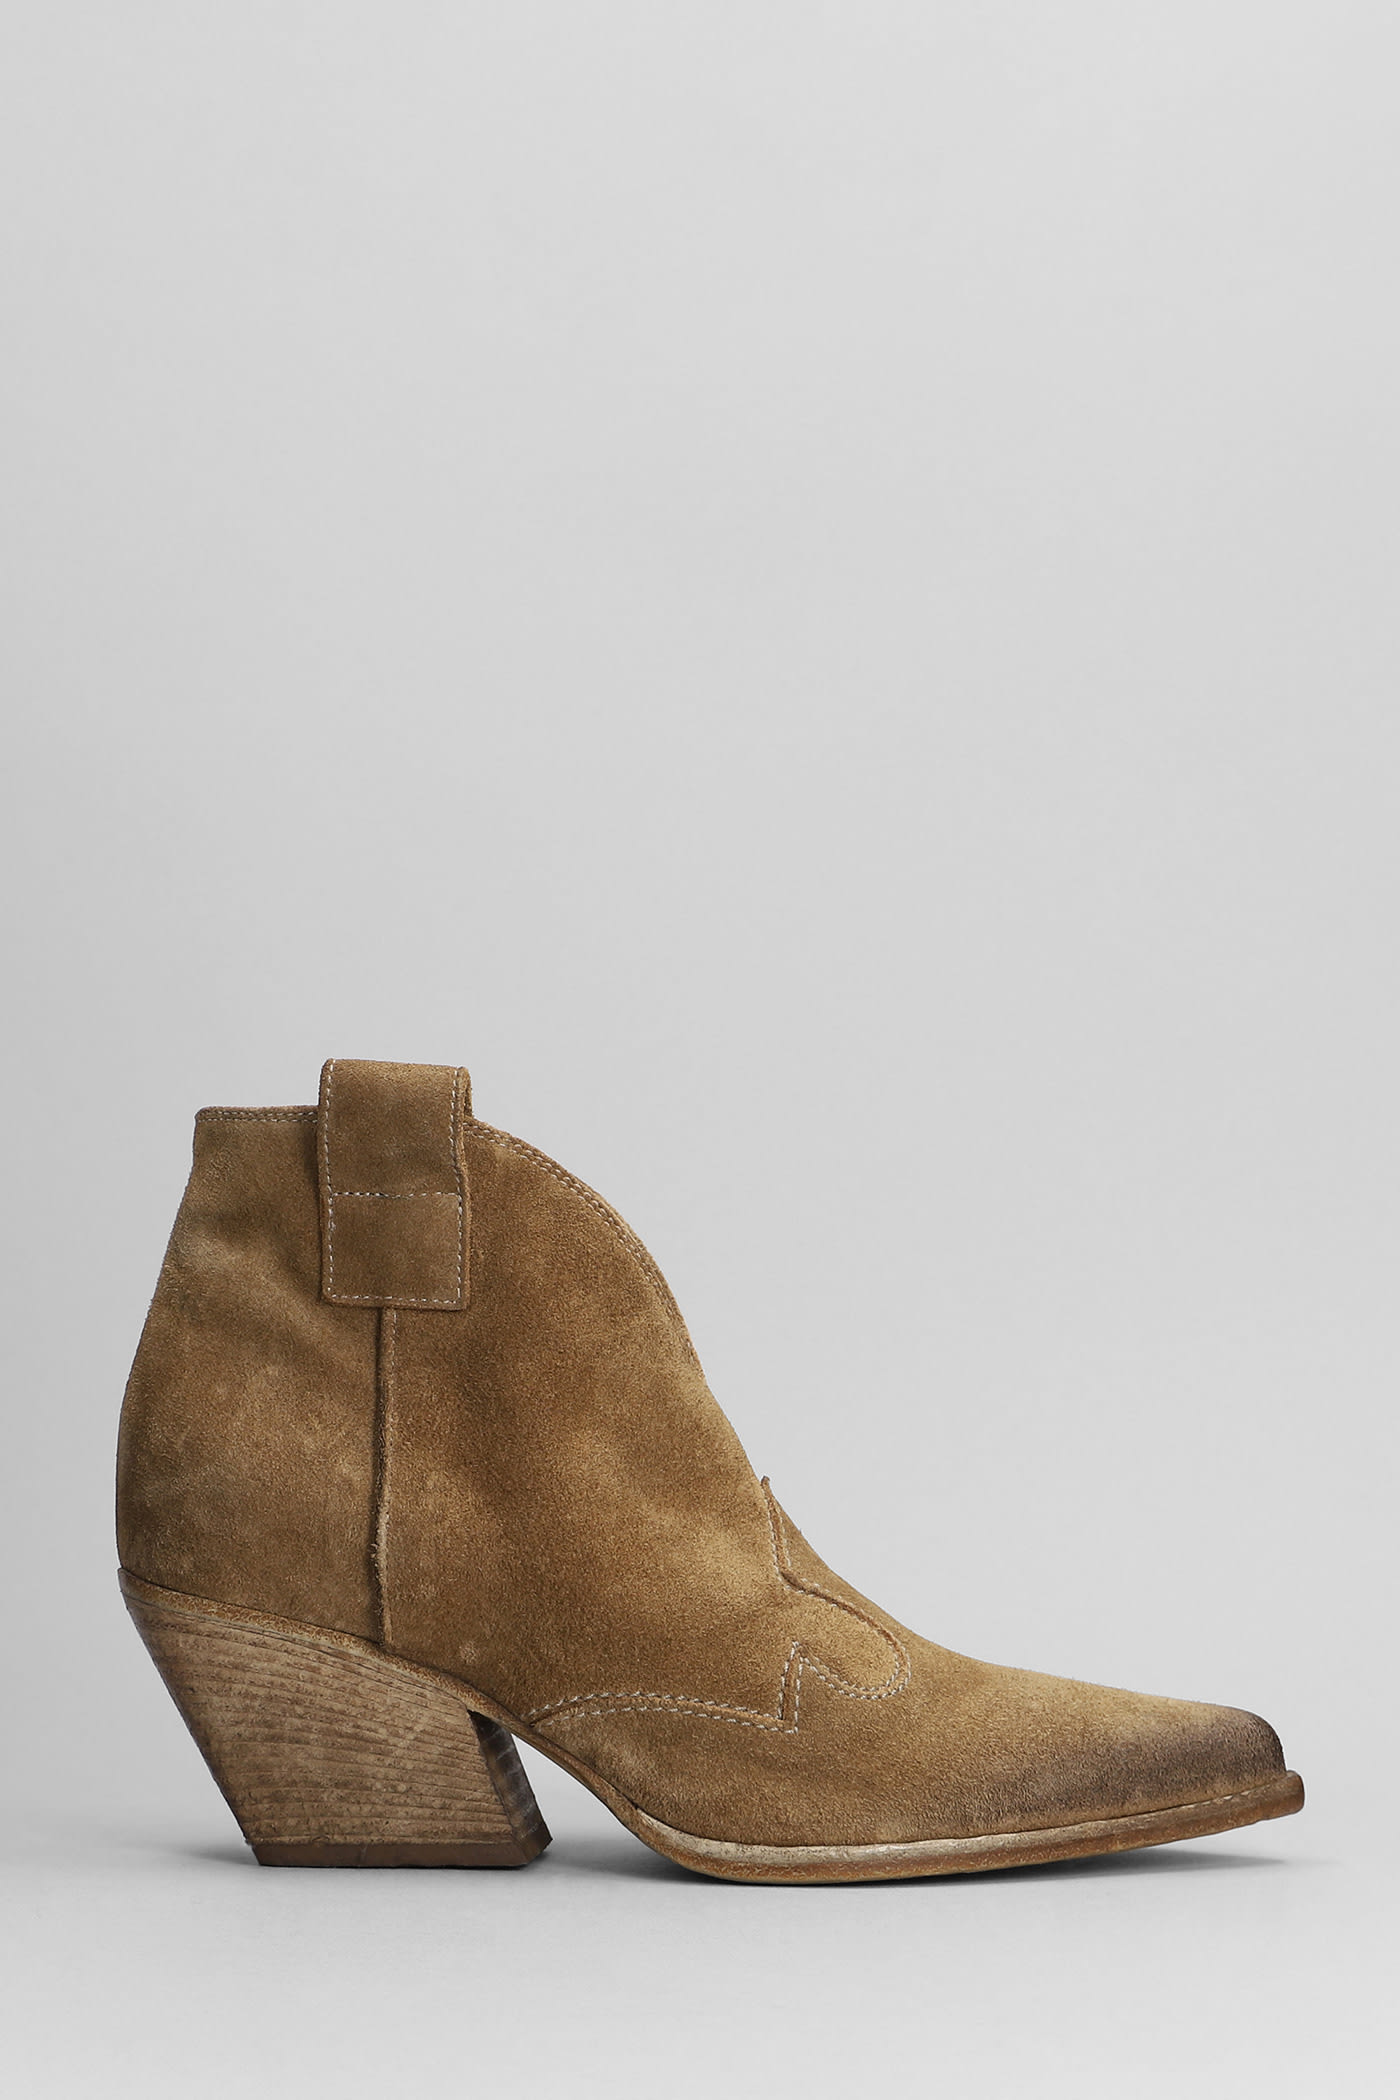 ELENA IACHI TEXAN ANKLE BOOTS IN CAMEL SUEDE